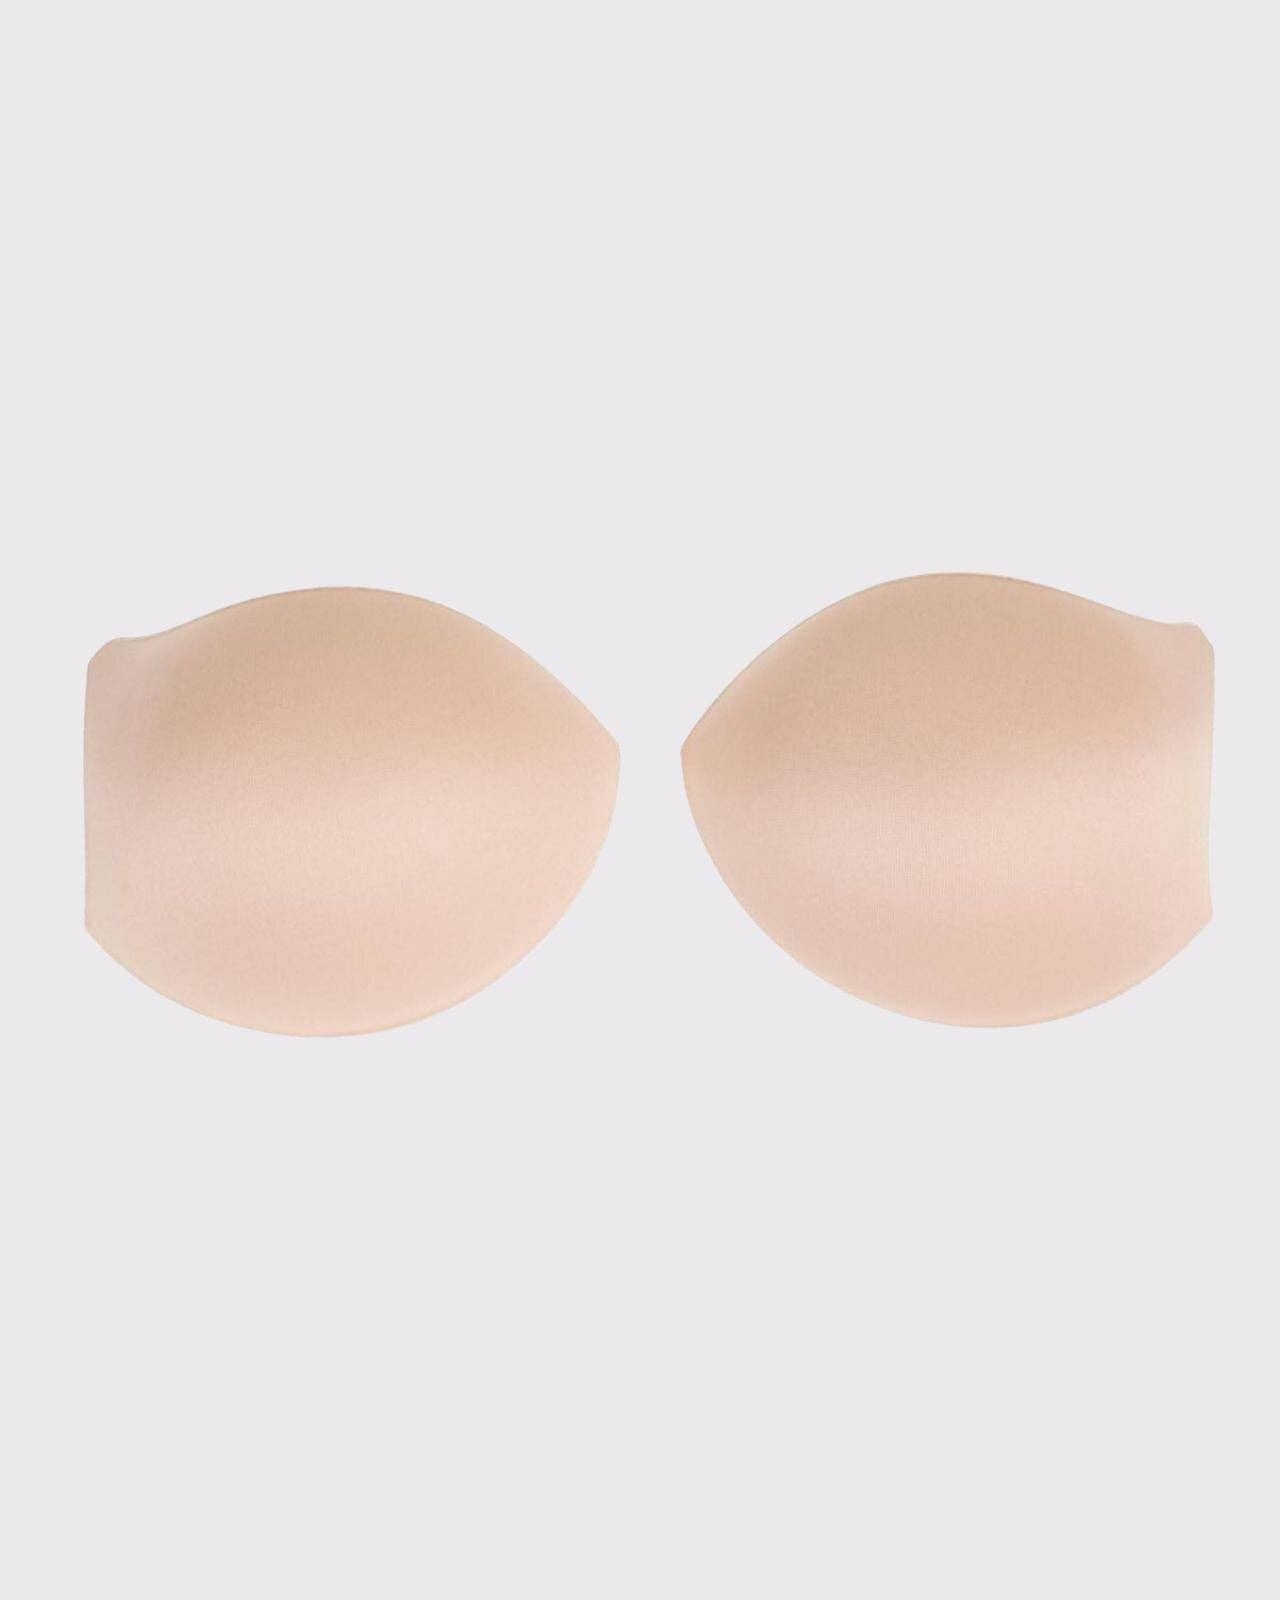 Purchase Wholesale mastectomy bras. Free Returns & Net 60 Terms on Faire